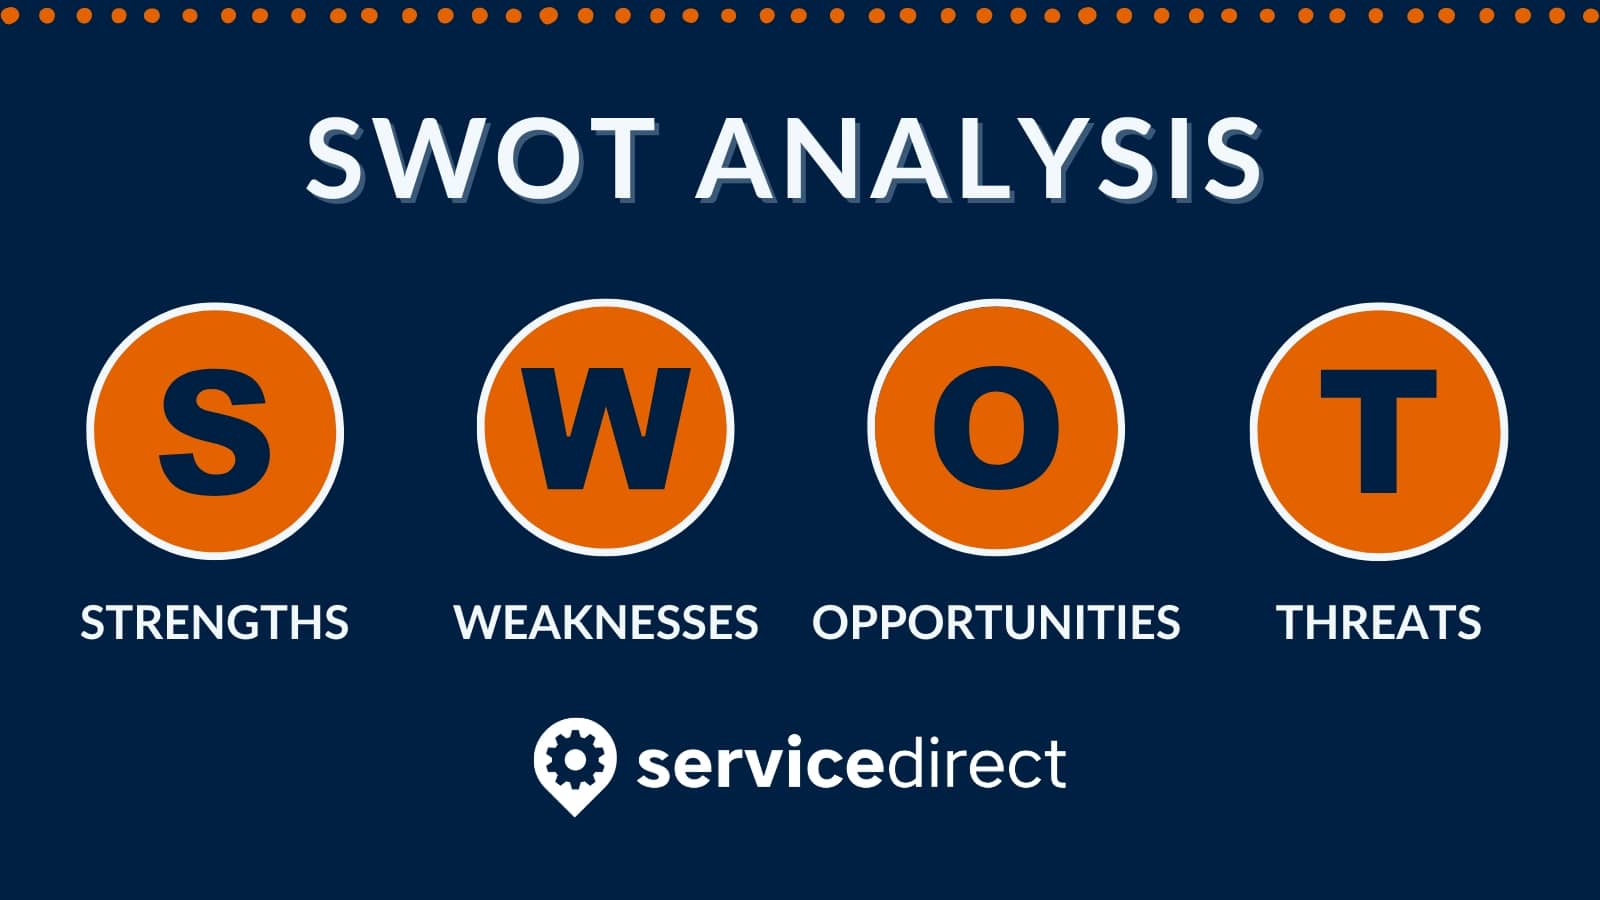 A SWOT analysis is when a business analyzes its strengths, weaknesses, opportunities, and threats. 